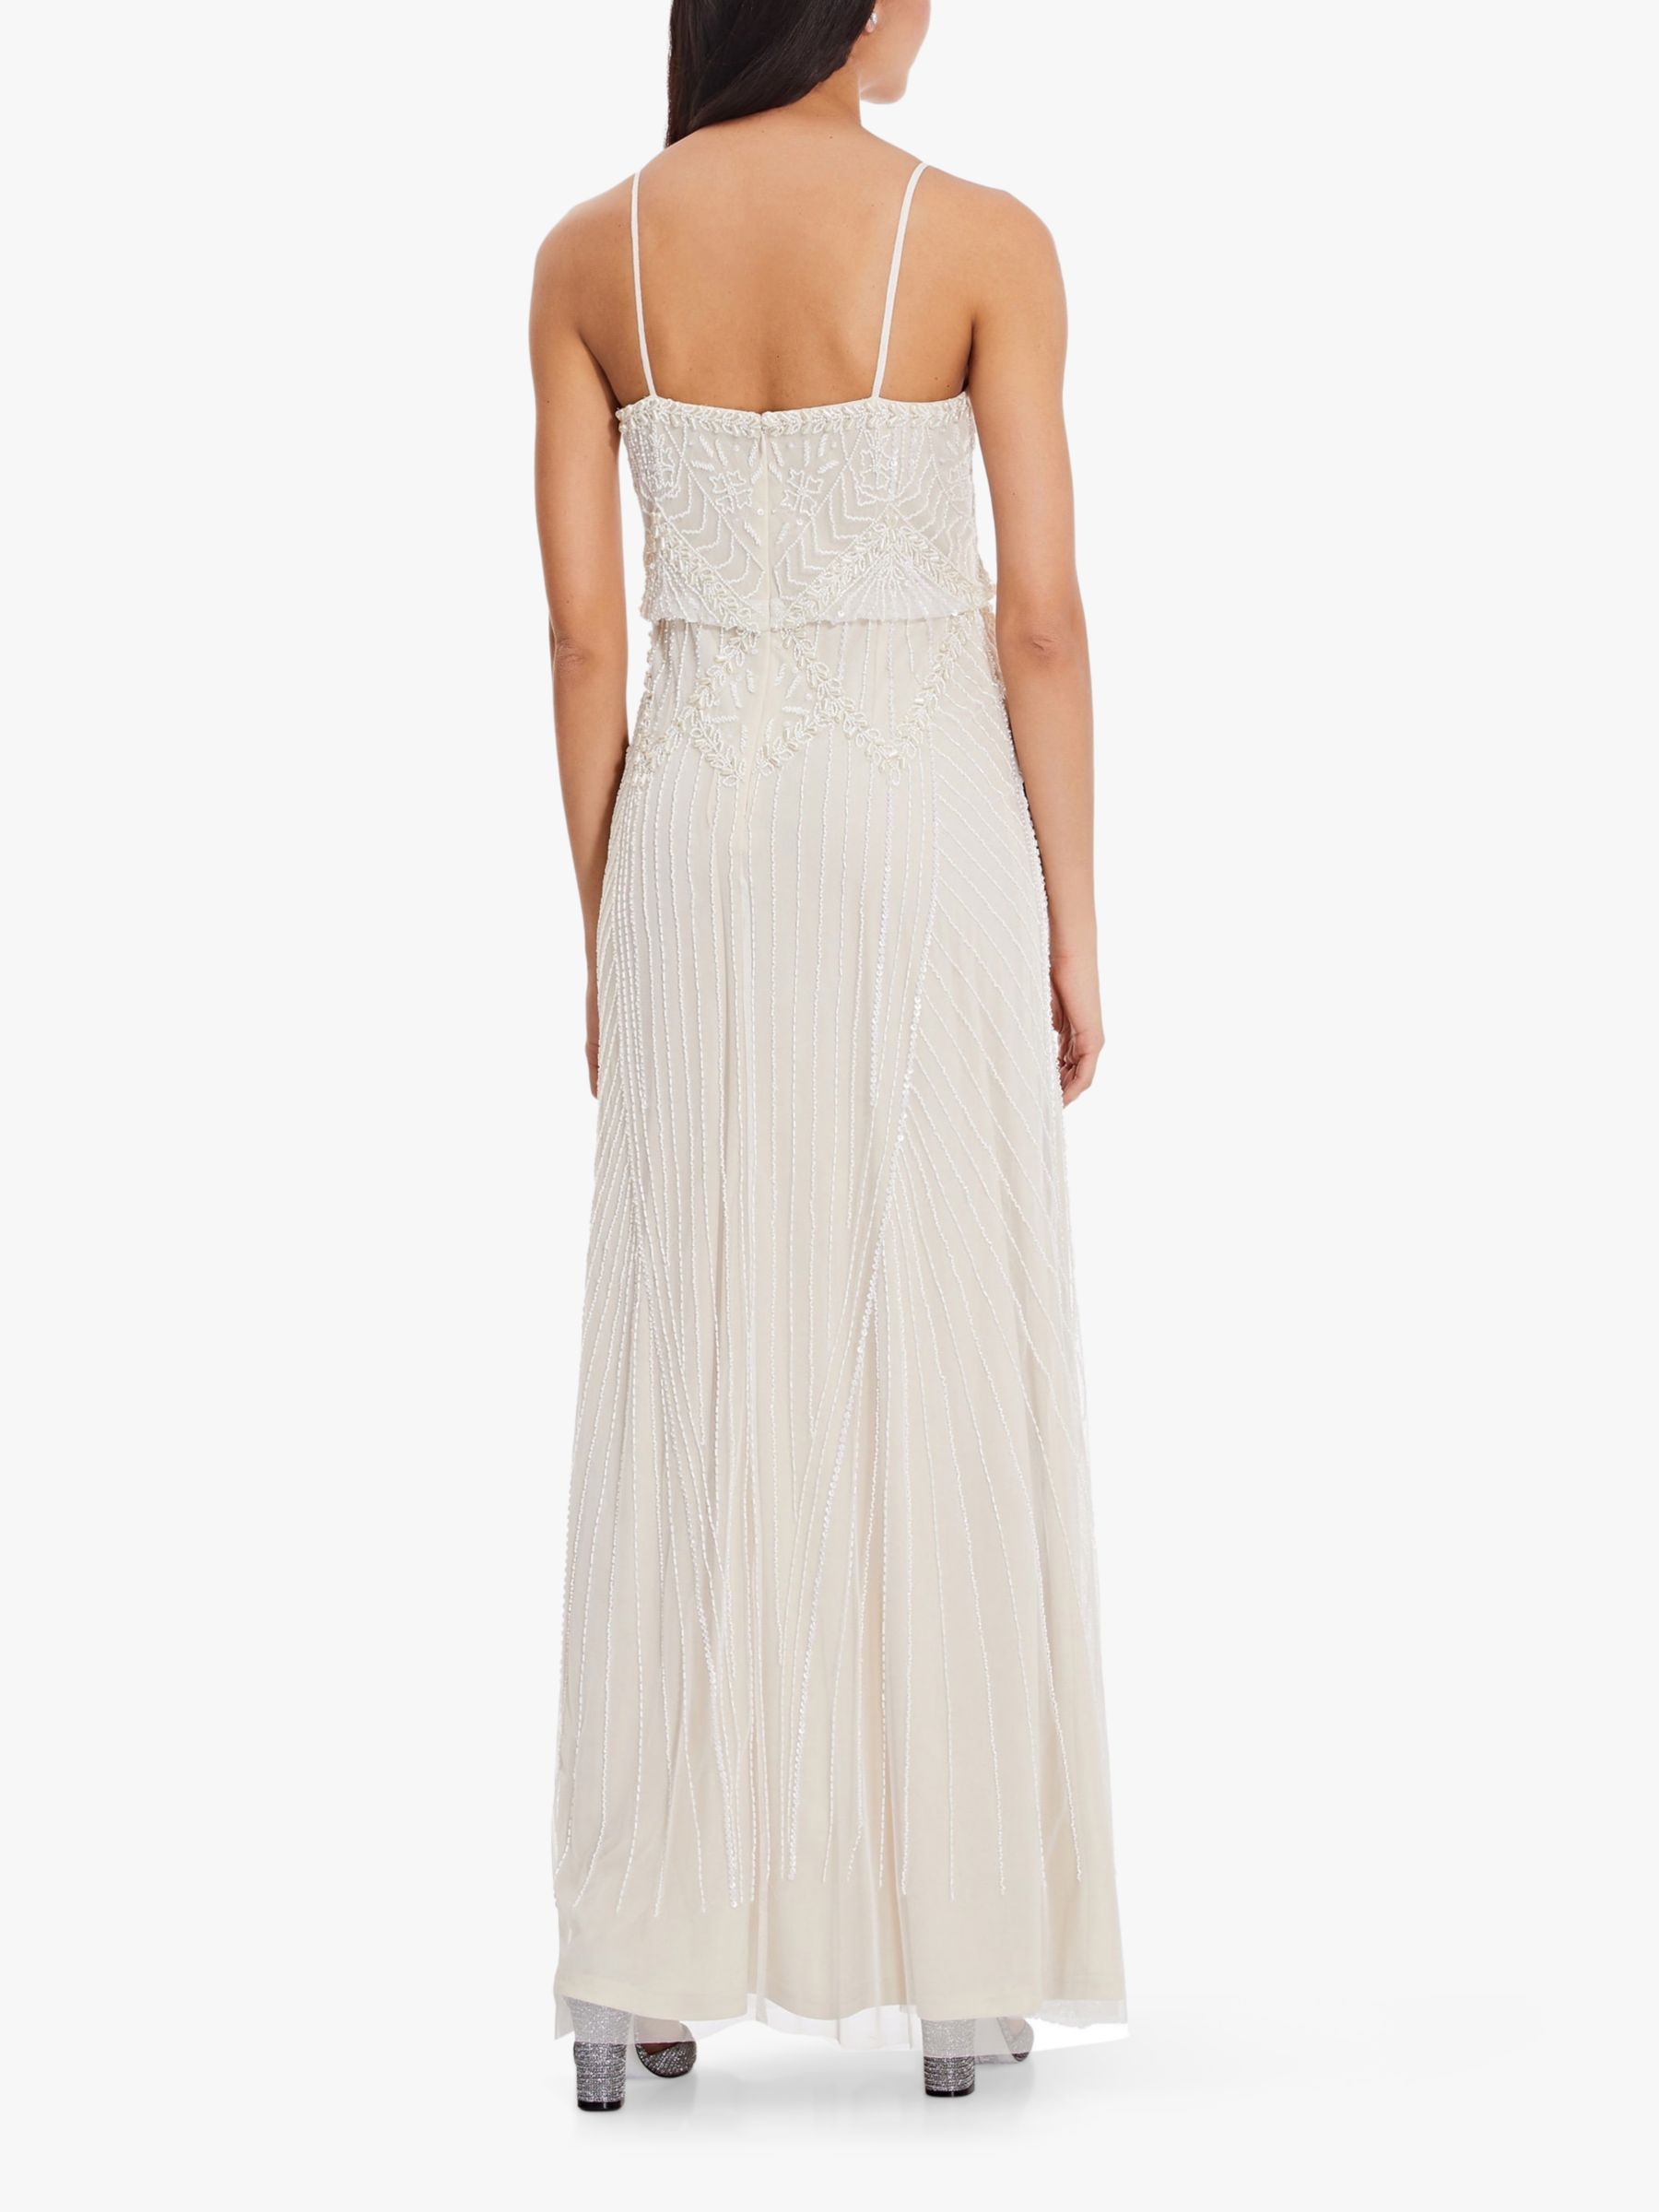 Adrianna Papell Beaded Blouson Gown, Ivory